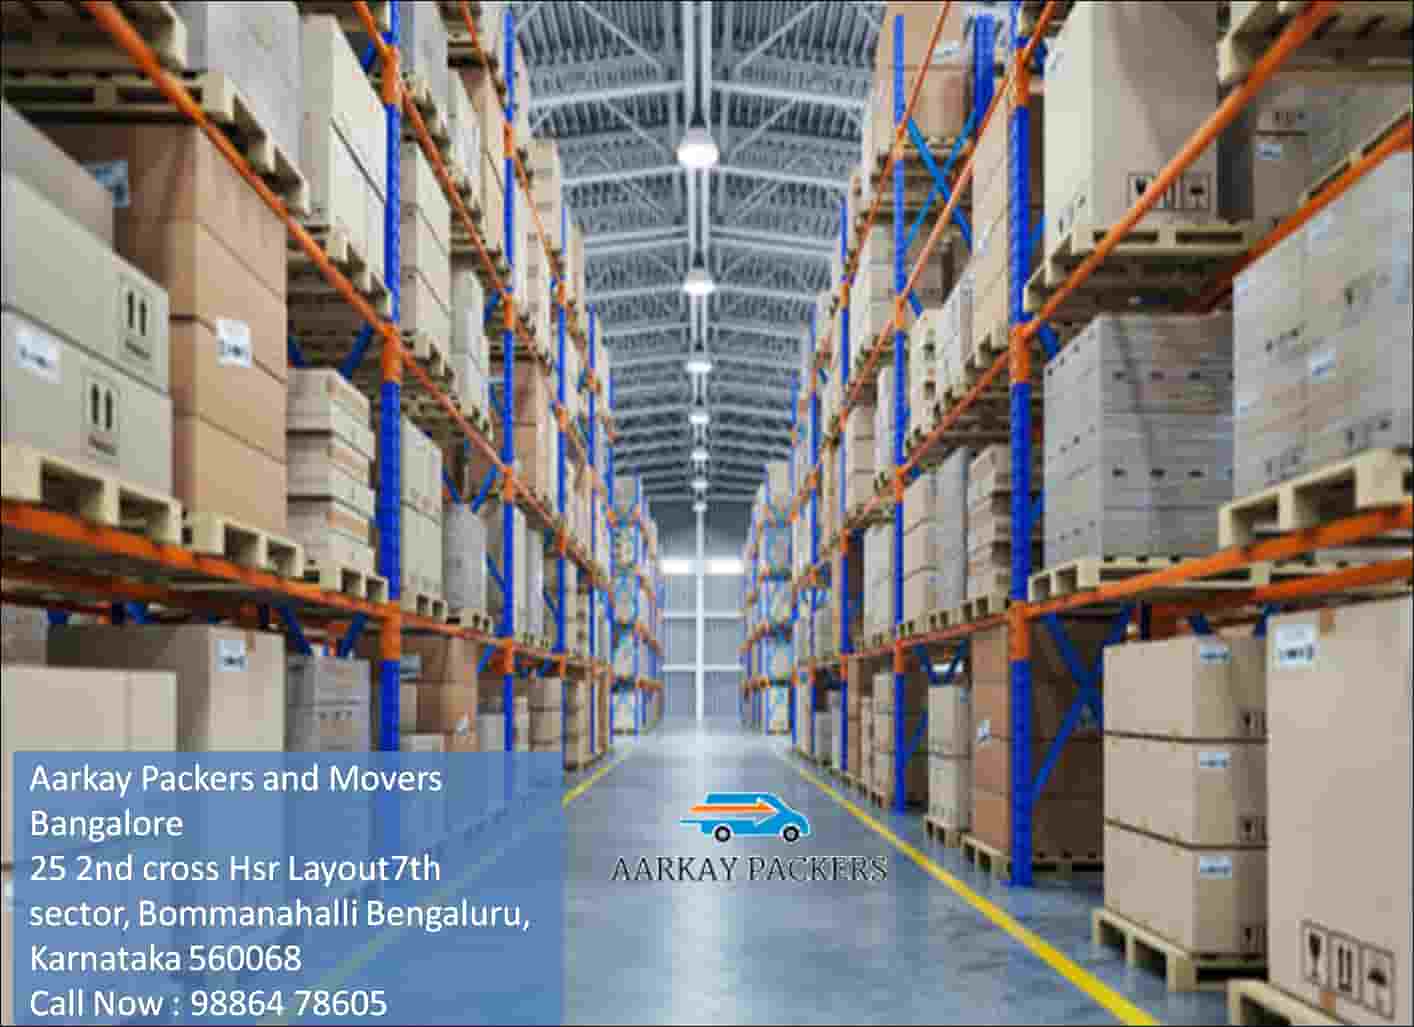 Warehouse Services Bangalore - Aarkay Packers and Movers Bangalore